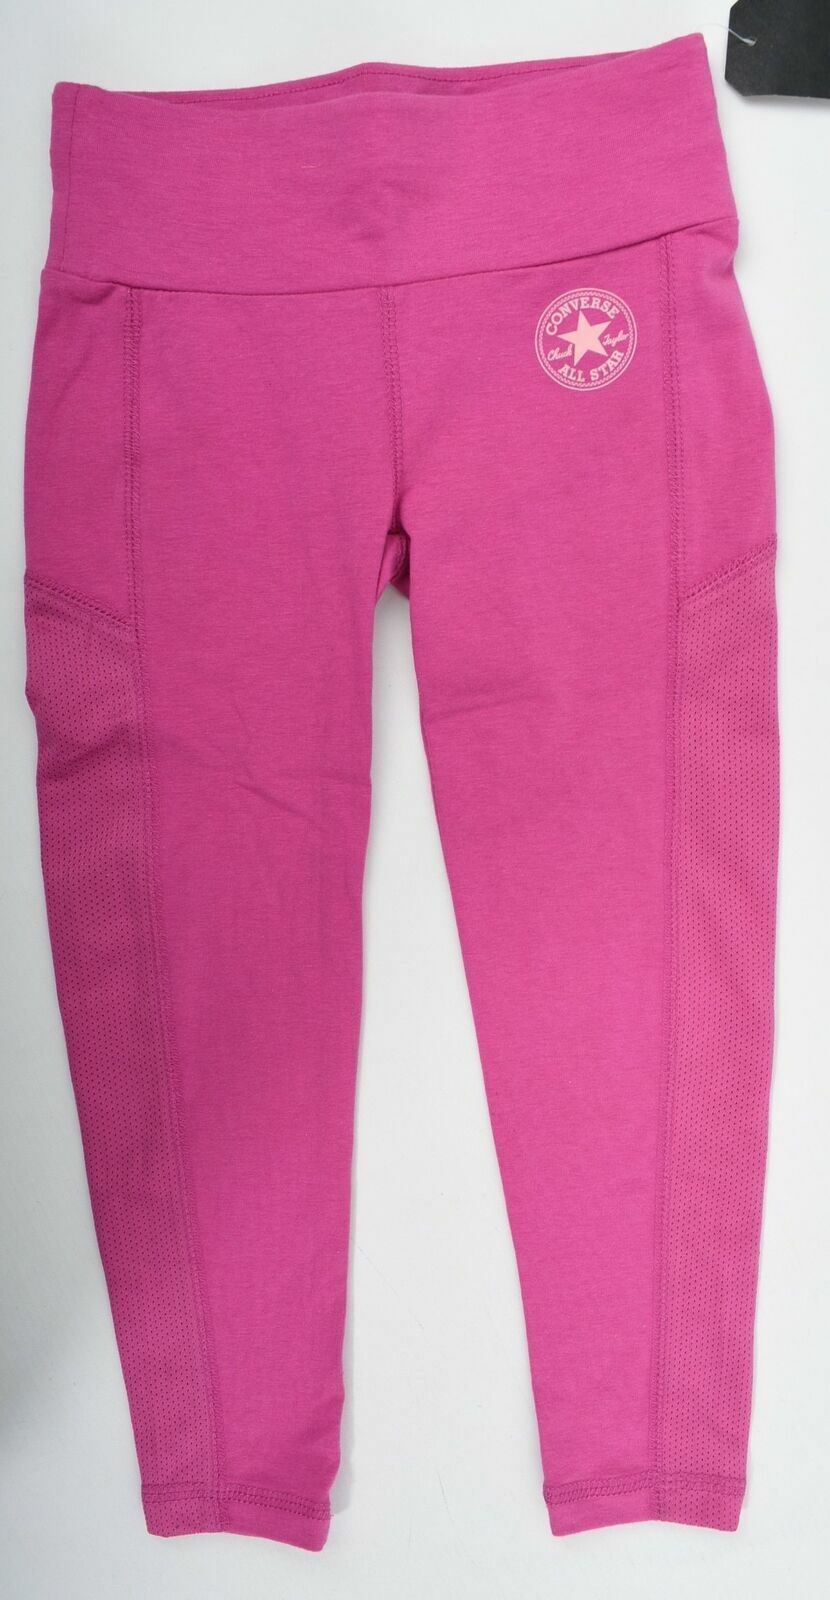 CONVERSE ALL-STAR Girl's Pink Leggings- size 4 years to 5 years